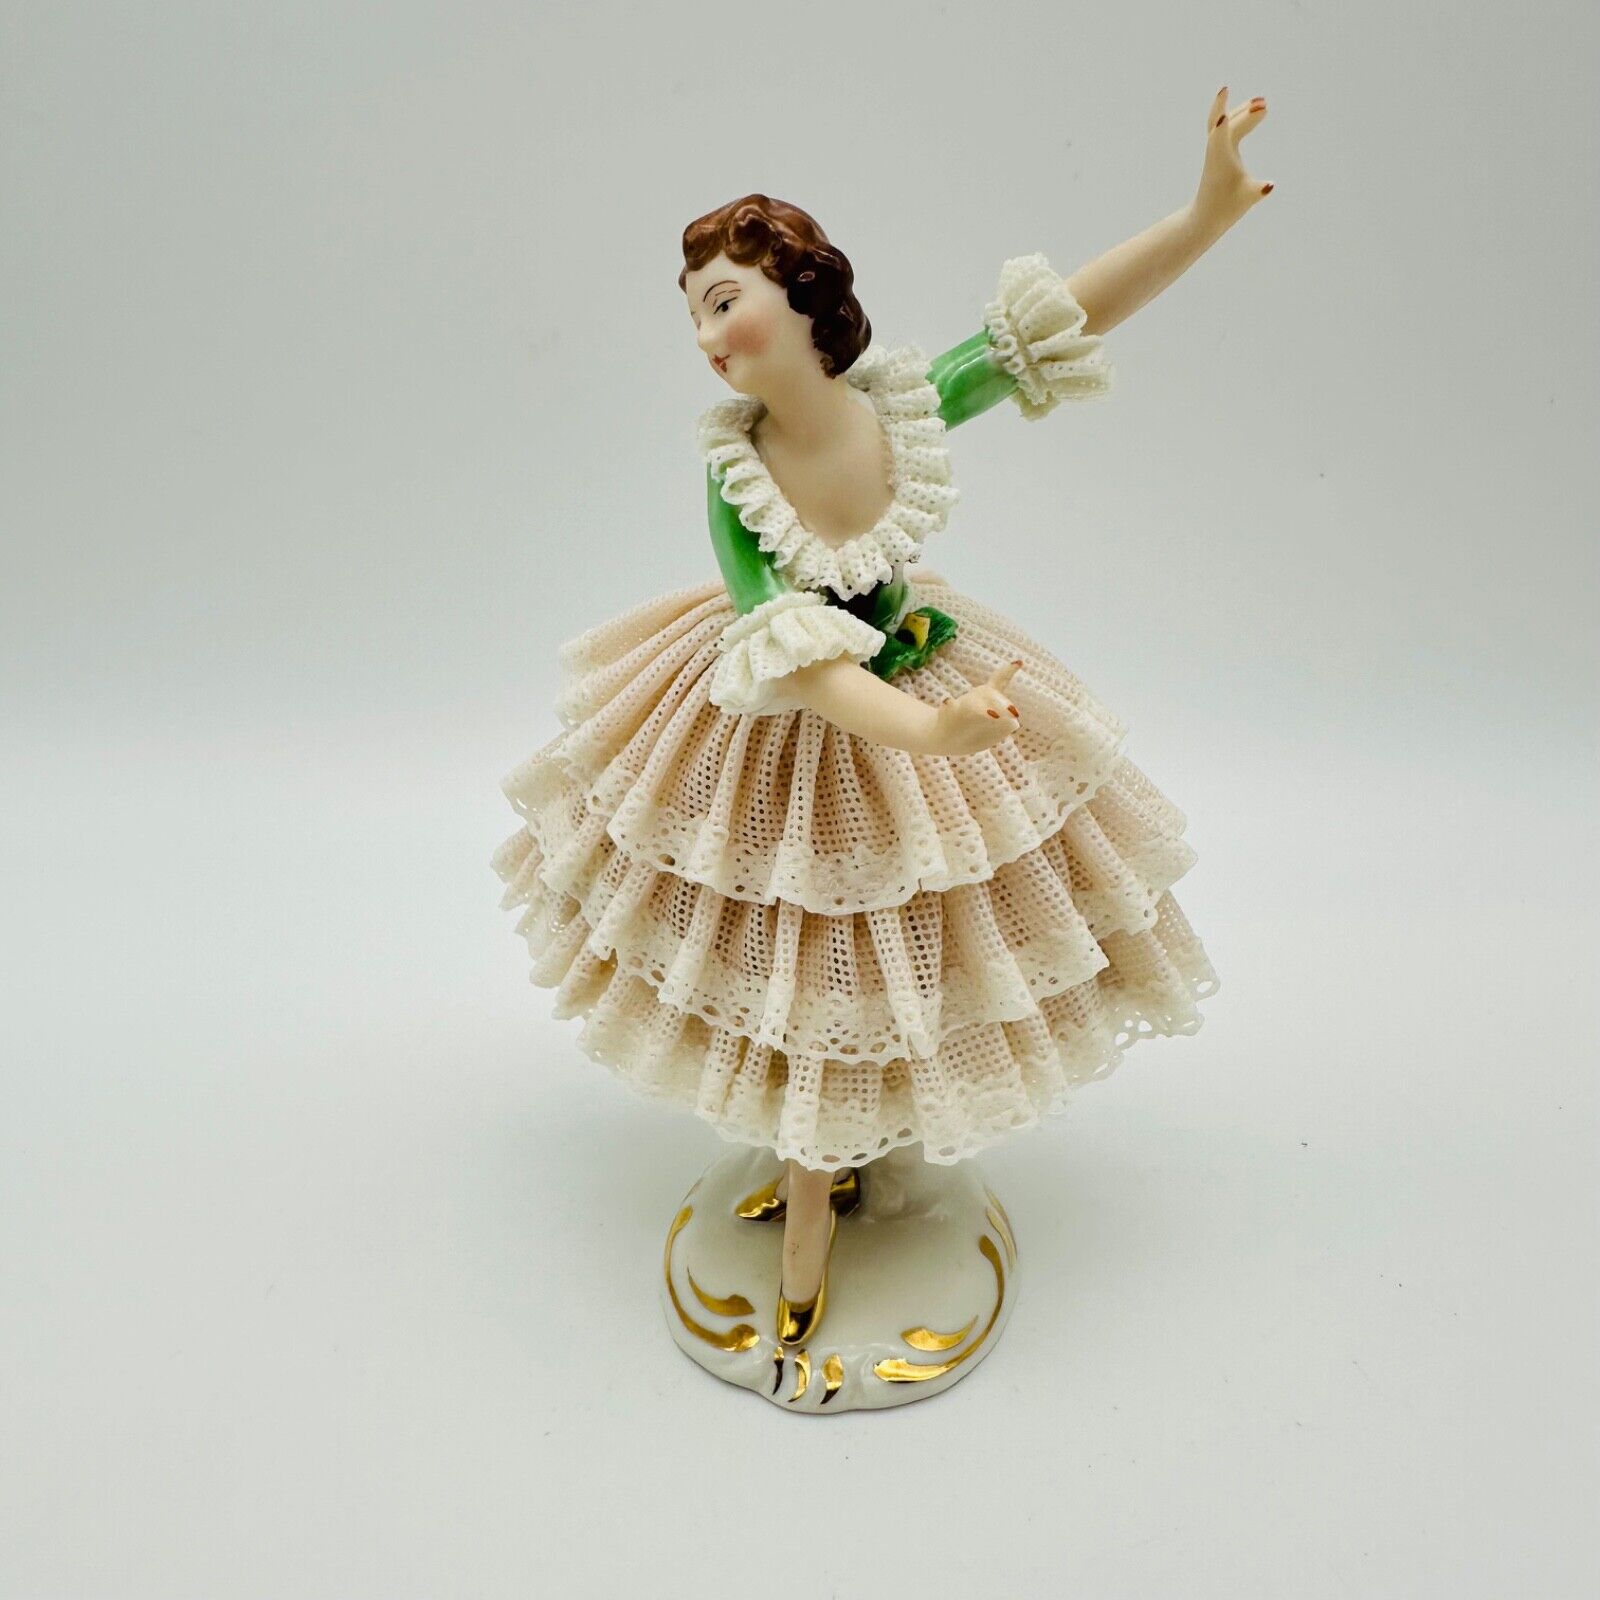 Antique Dresden Germany Lace Porcelain Figurine Lady Ballerina Dancing 5'' High.